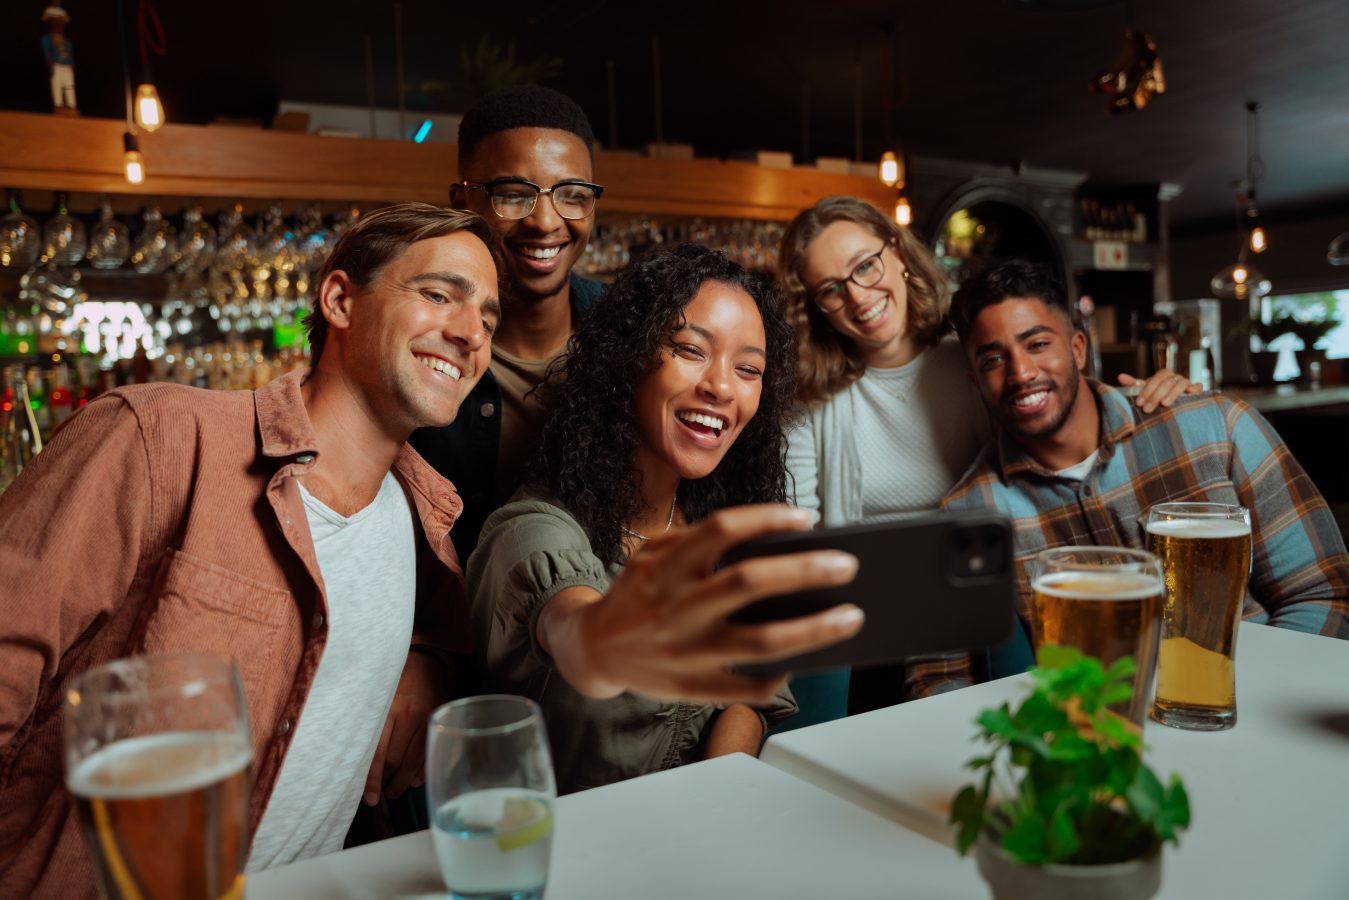 Group of young adult friends eating dinner at restaurant taking selfie with phone.